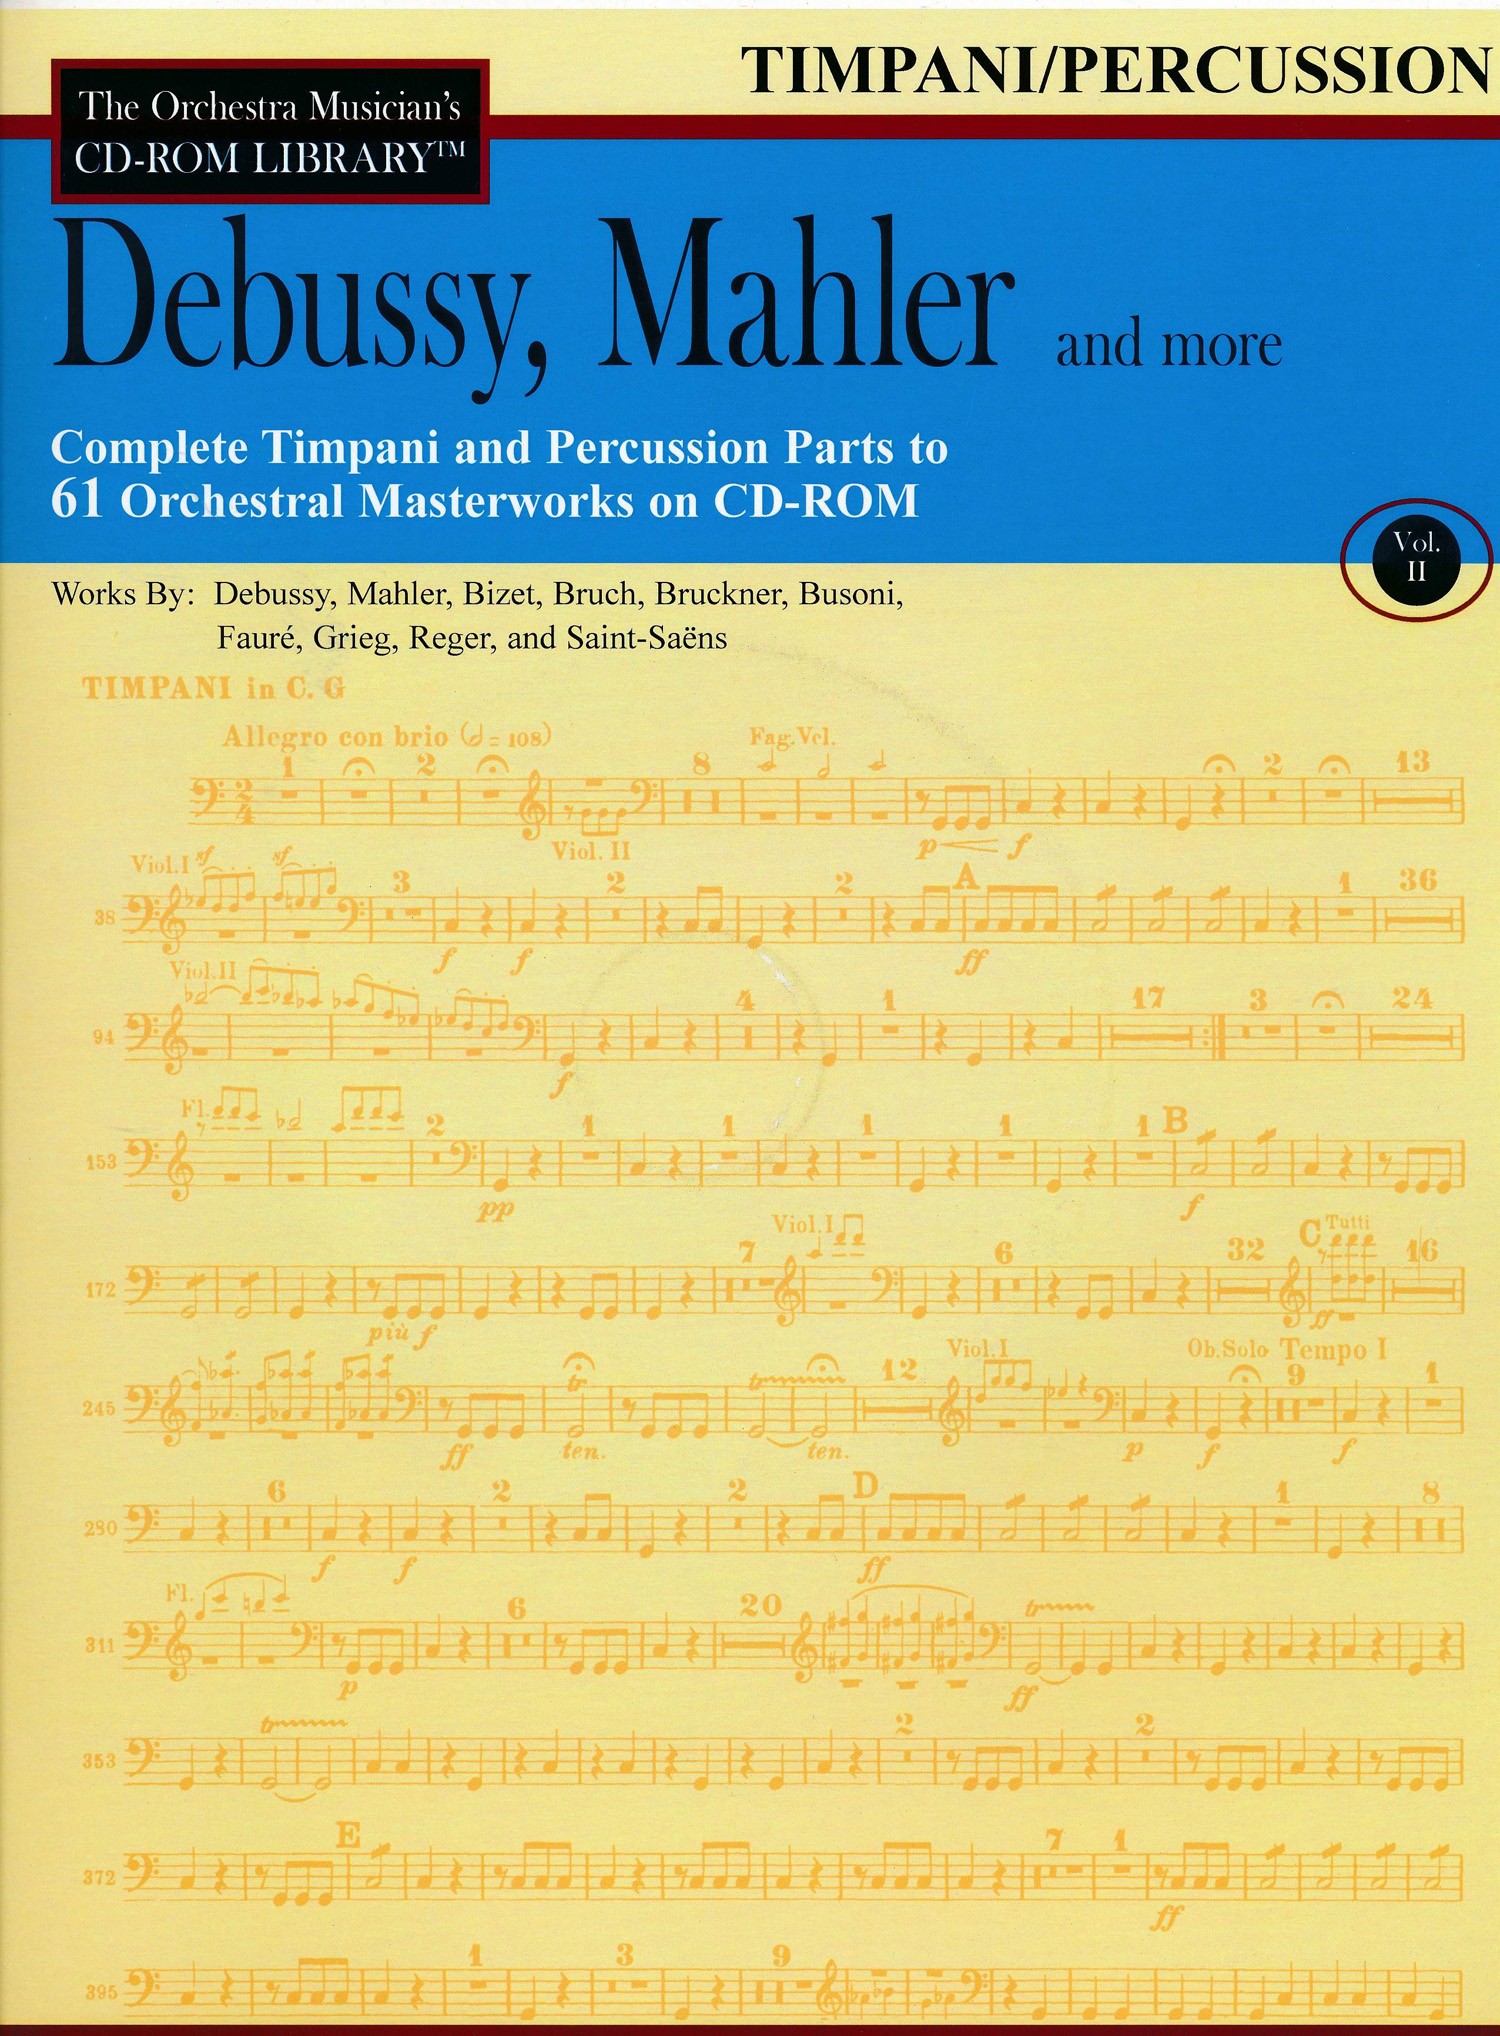 Debussy, Mahler and More - Volume 2 (CD Library)